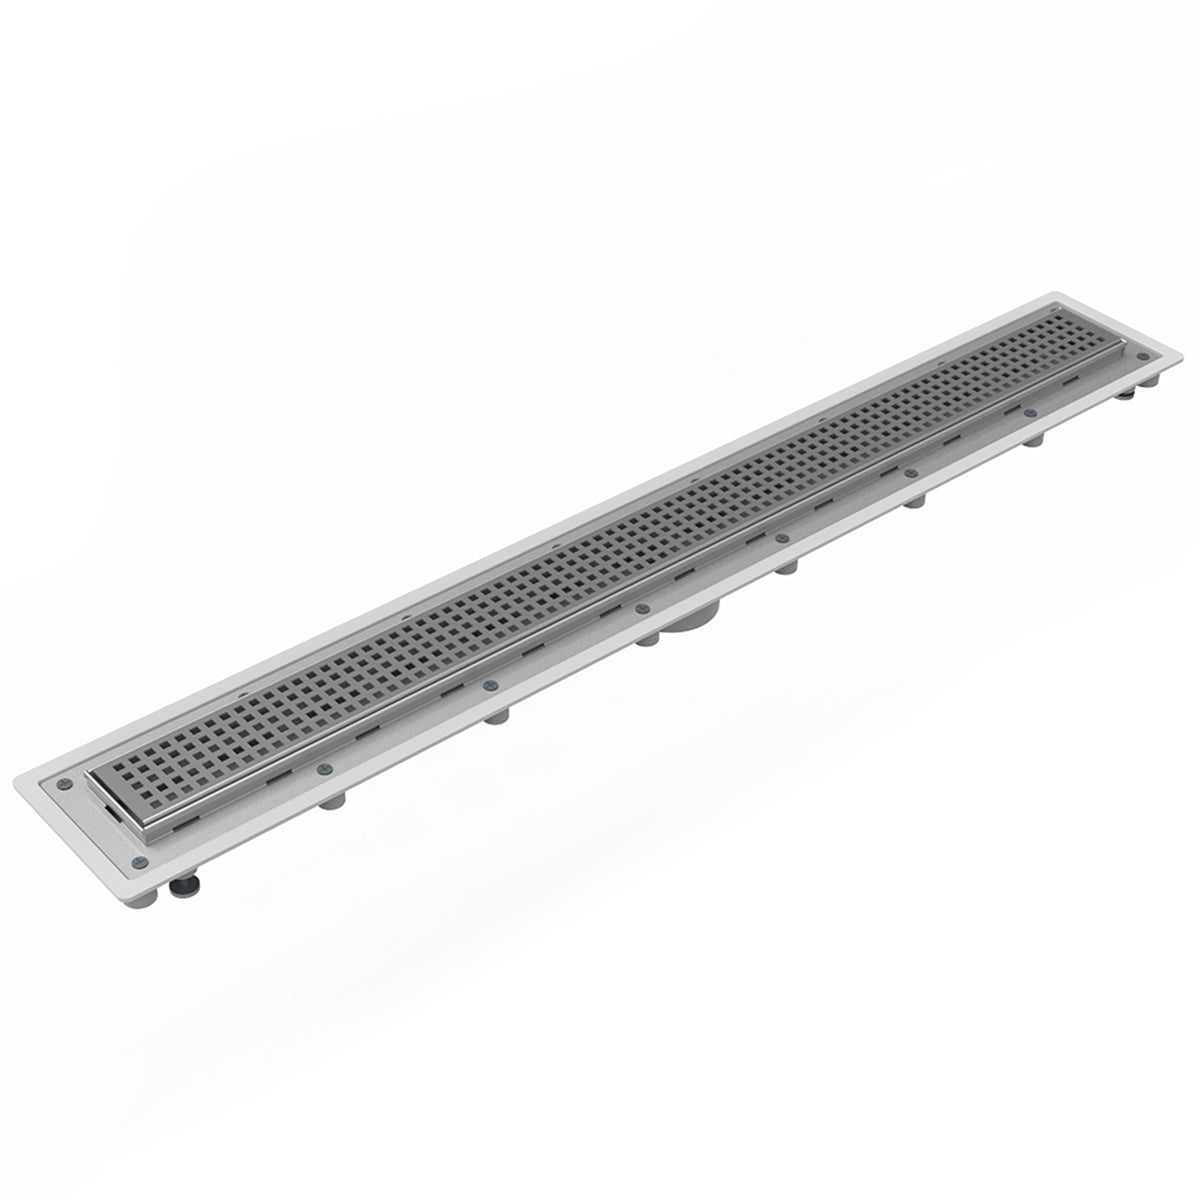 Infinity Drain 42" Universal Infinity Linear Drain Kit with PVC Channel and Squares Pattern Grate